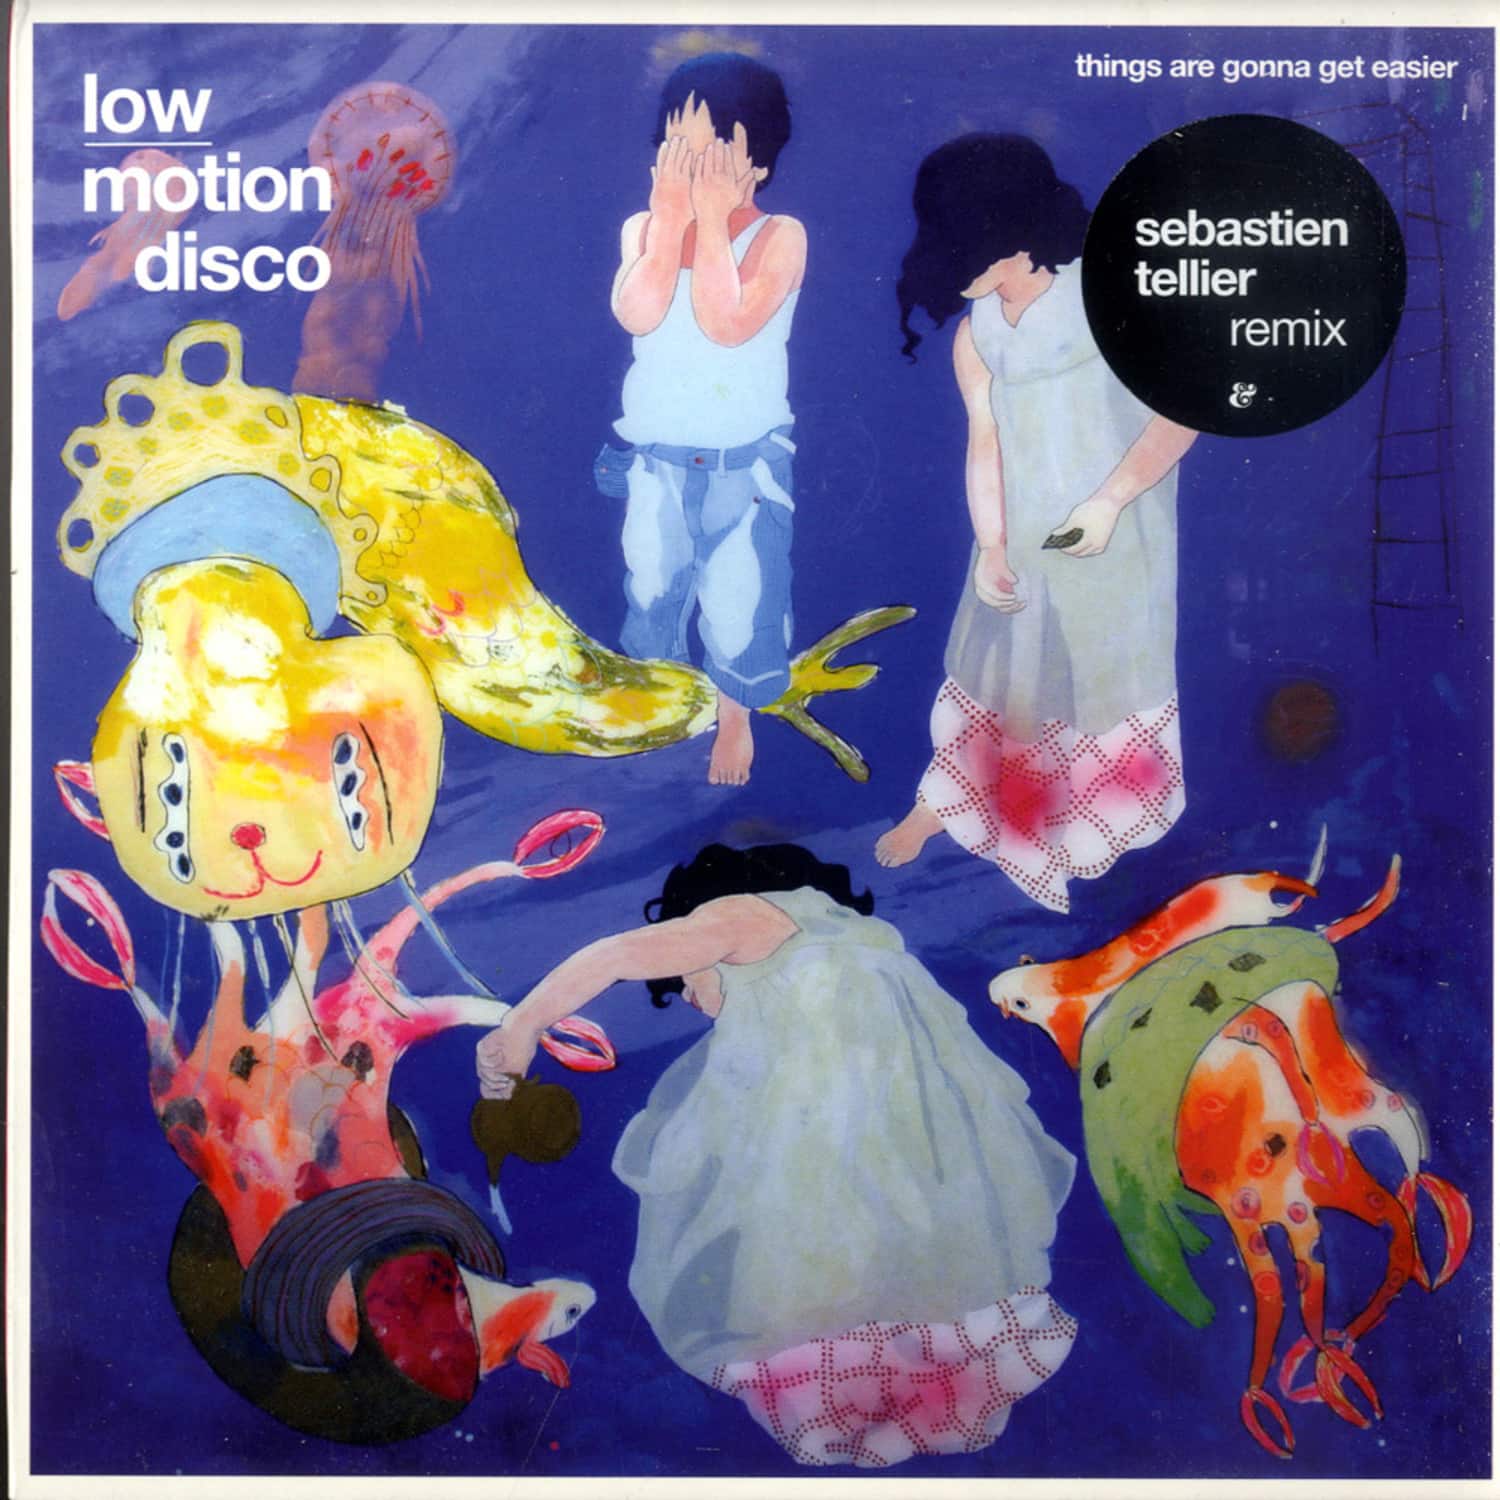 Low Motion Disco - THINGS ARE GONNA GET EASIER